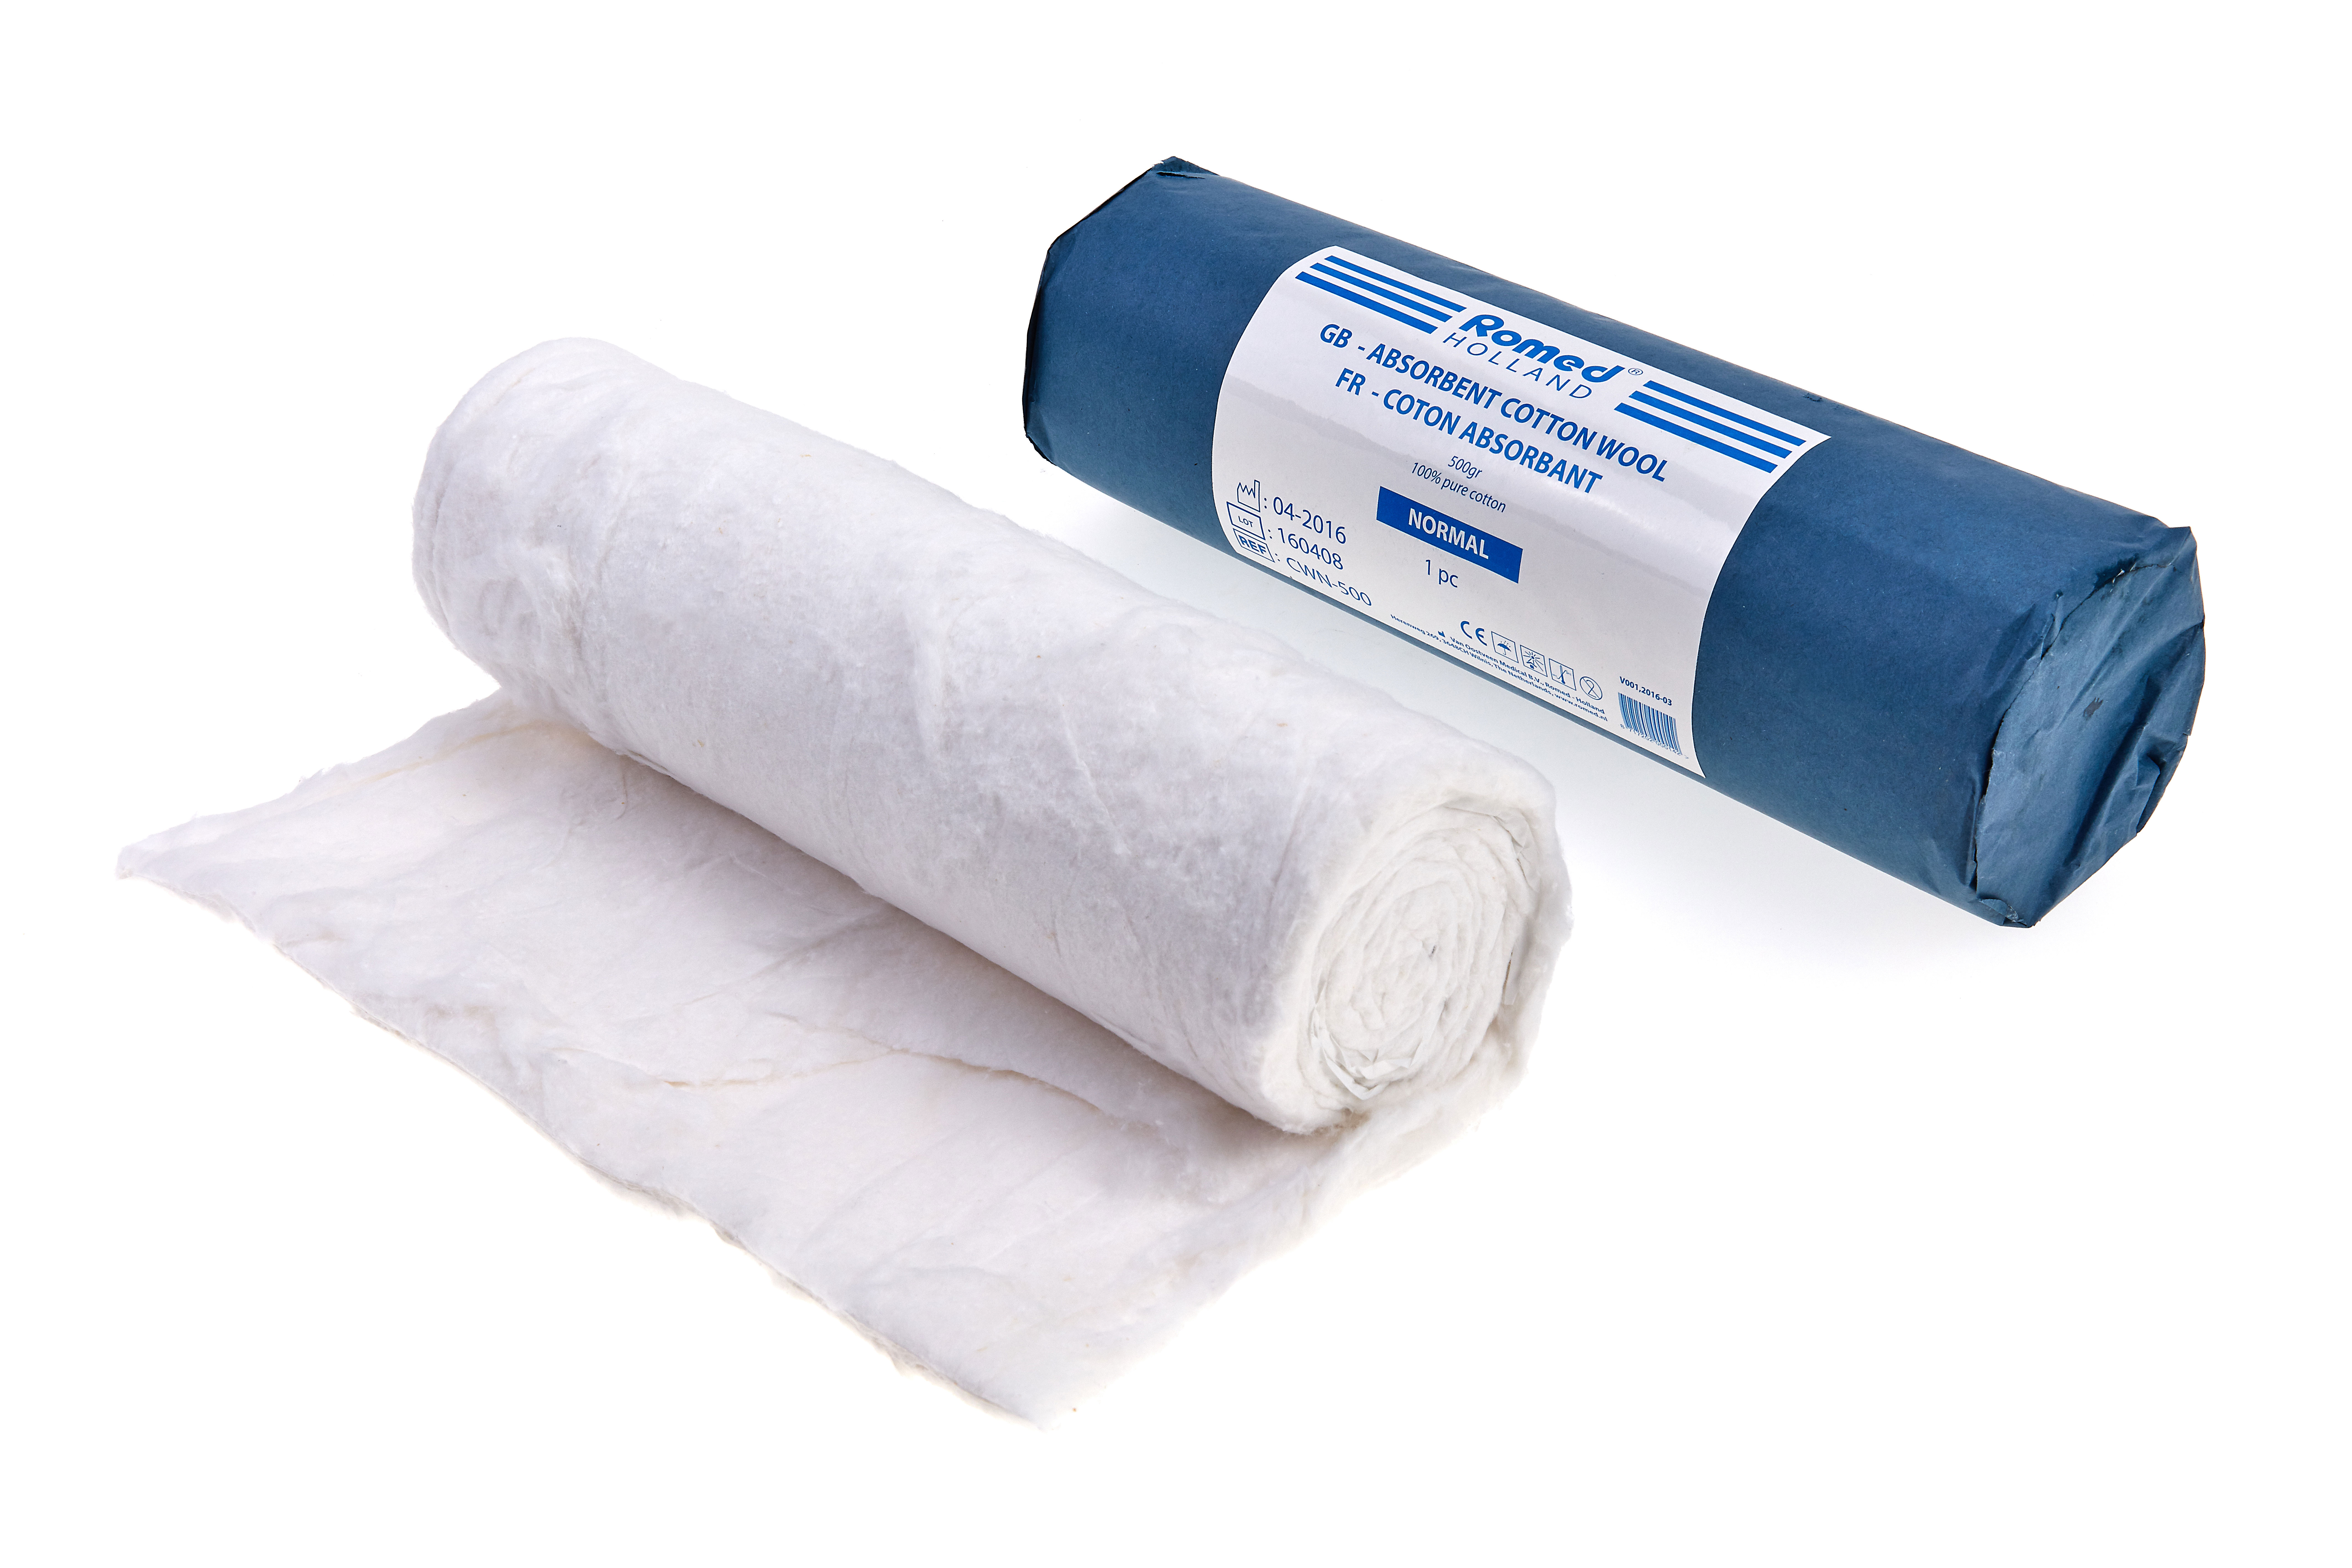 Absorbent cotton wool